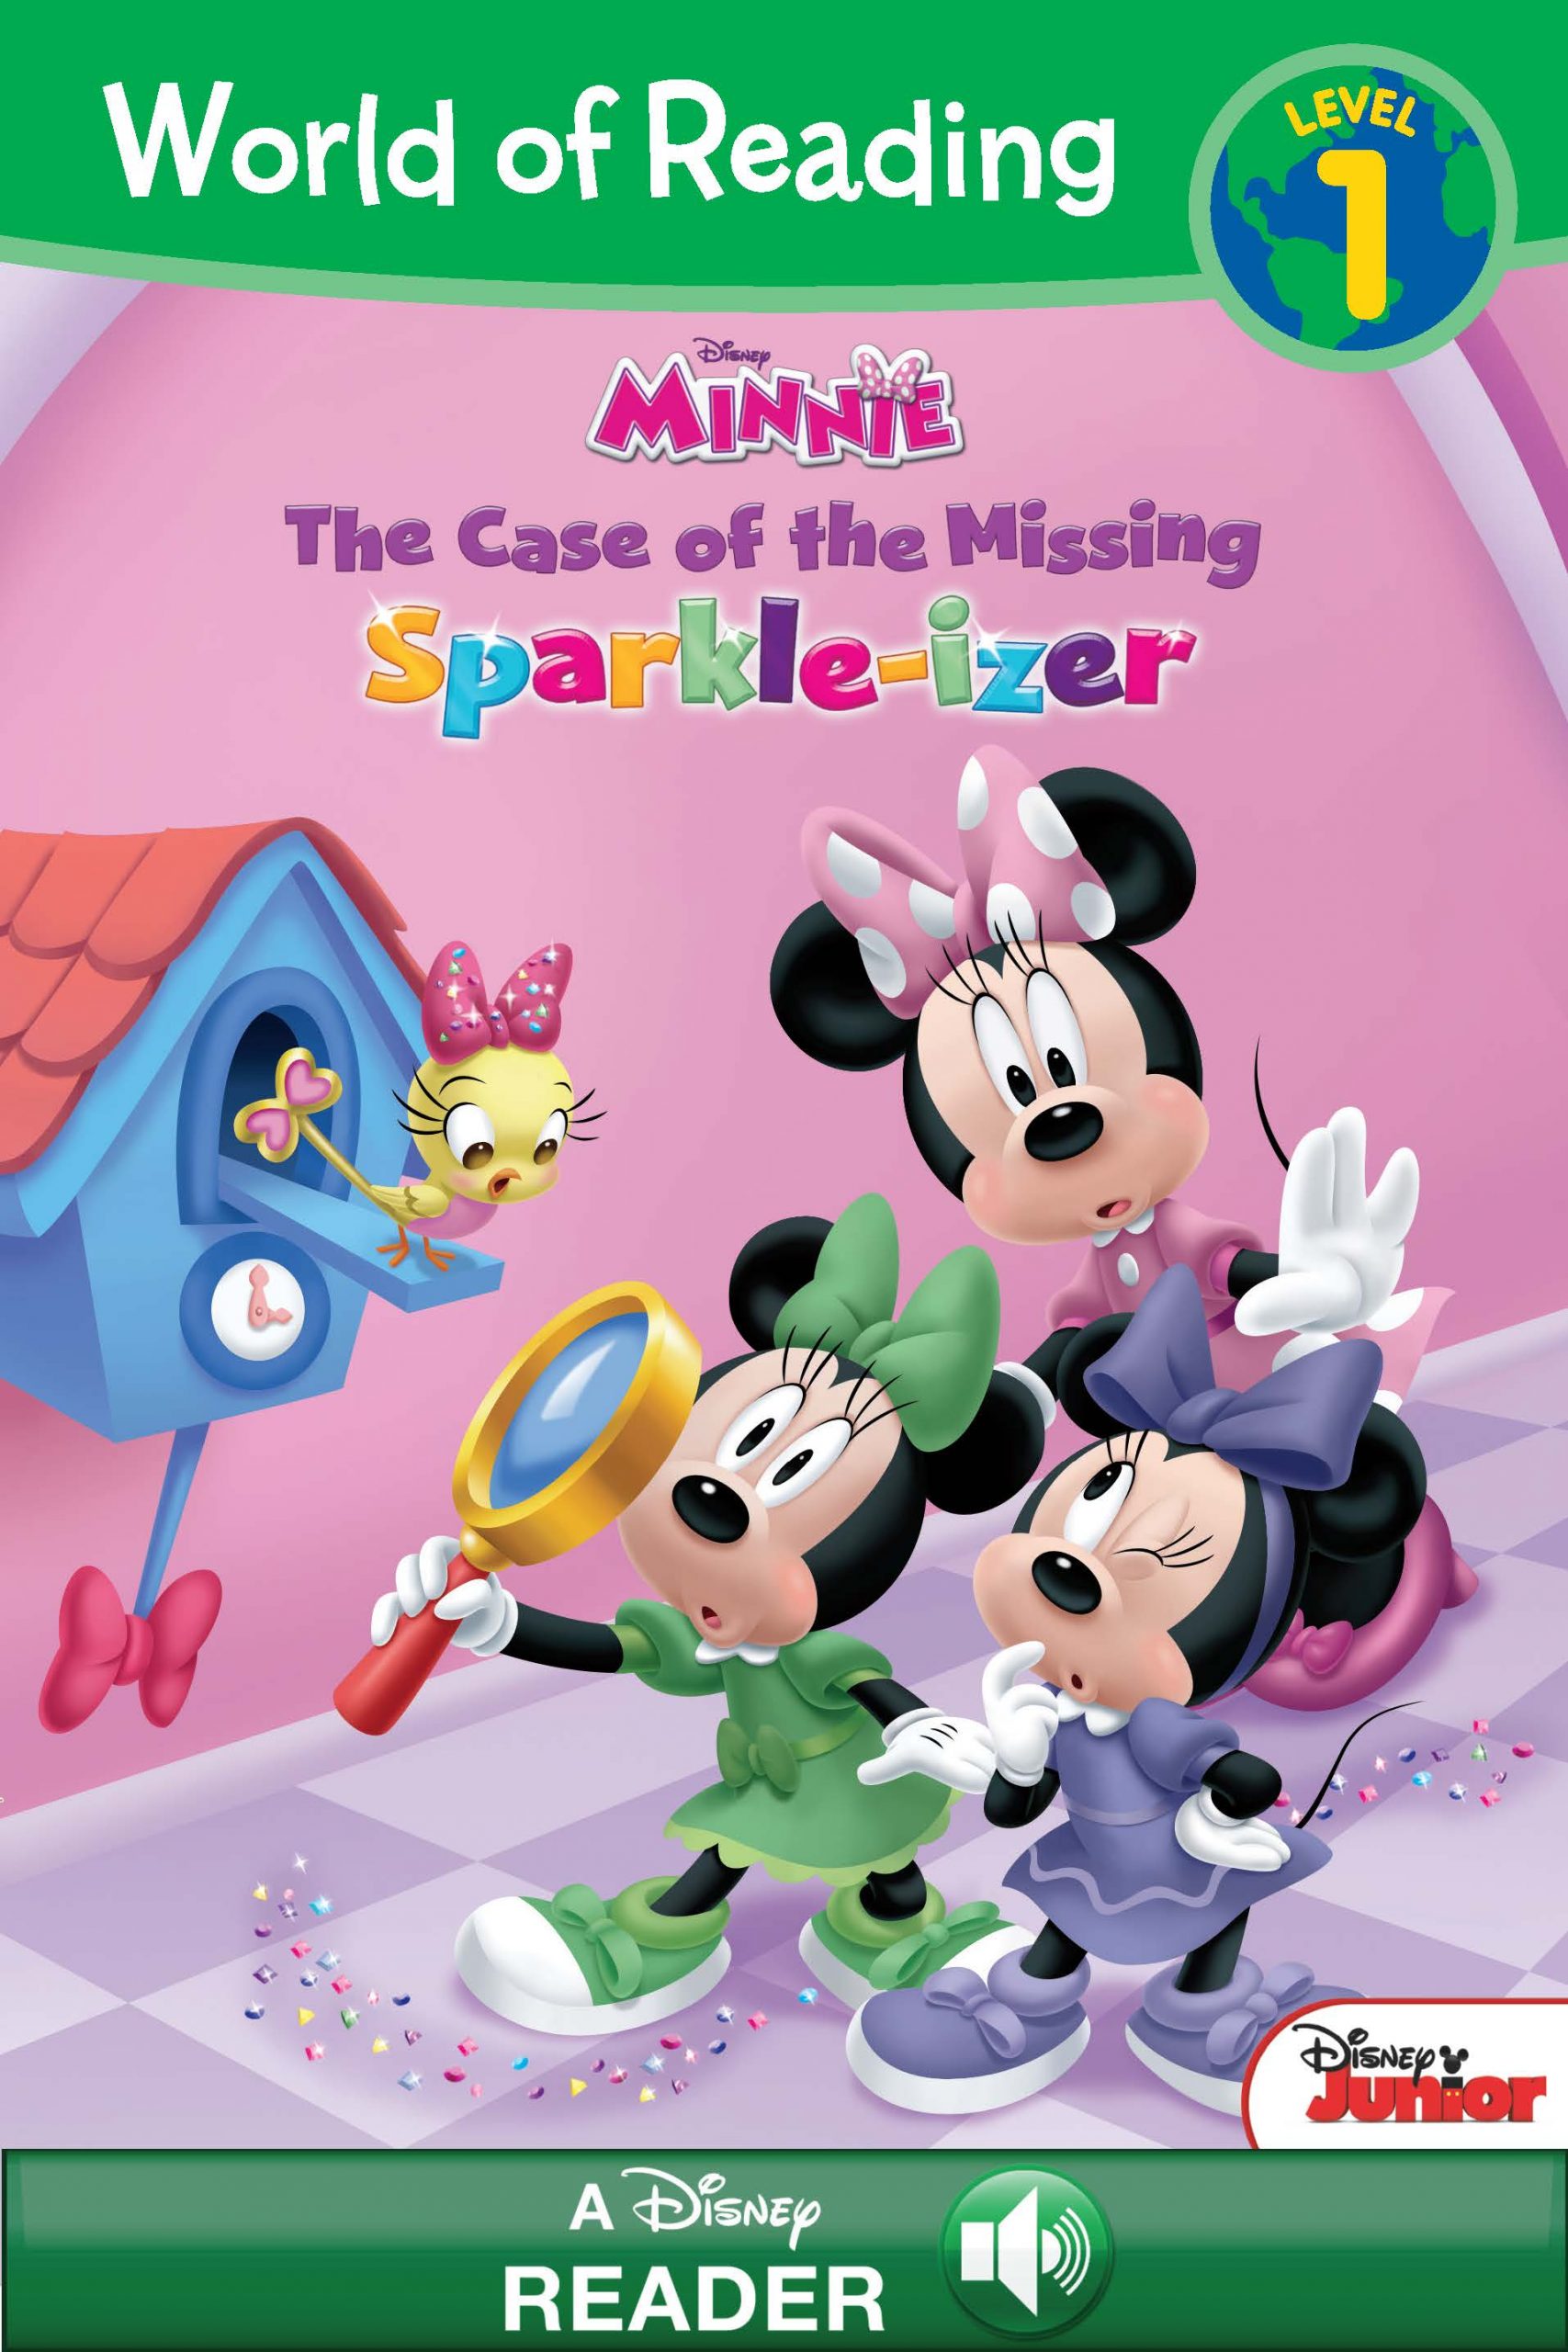 gebruiker hoofdpijn een vuurtje stoken The Case of the Missing Sparkle-izer A Read-Along eBook (Level 1) by  William Scollon - Disney, Mickey & Friends, Minnie Mouse Books